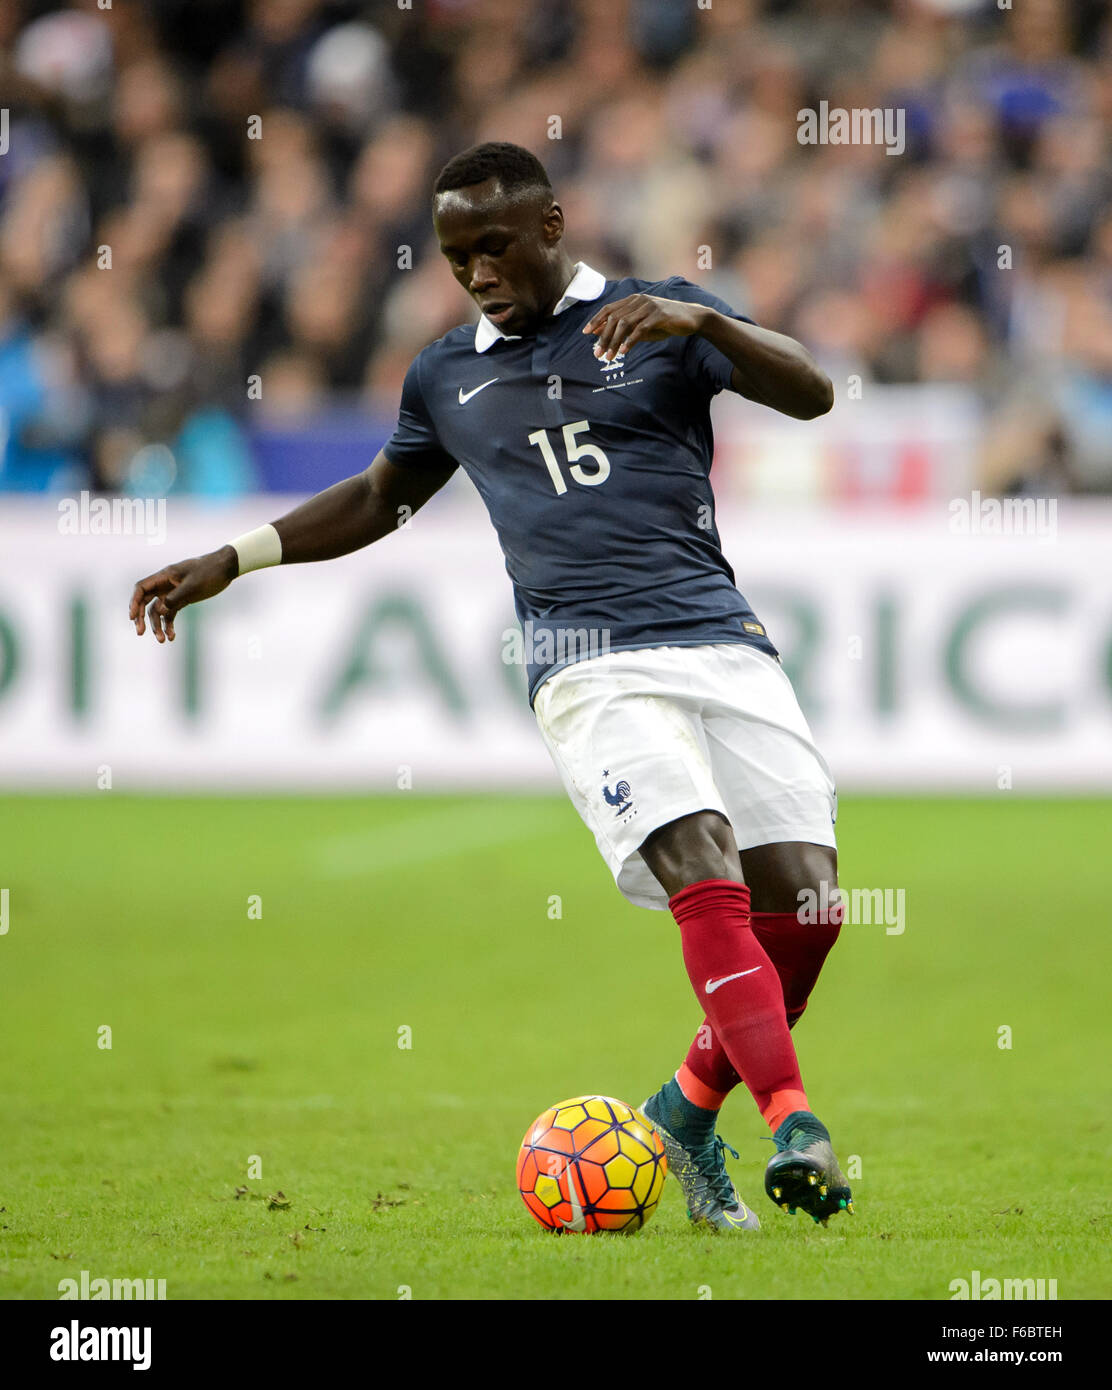 Paris, France. 13th Nov, 2015. France's Bacary Sagna in action during the international soccer friendly France vs Germany in Paris, France, 13 November 2015. Photo: Thomas Eisenhuth/dpa - NO WIRE SERVICE -/dpa/Alamy Live News Stock Photo